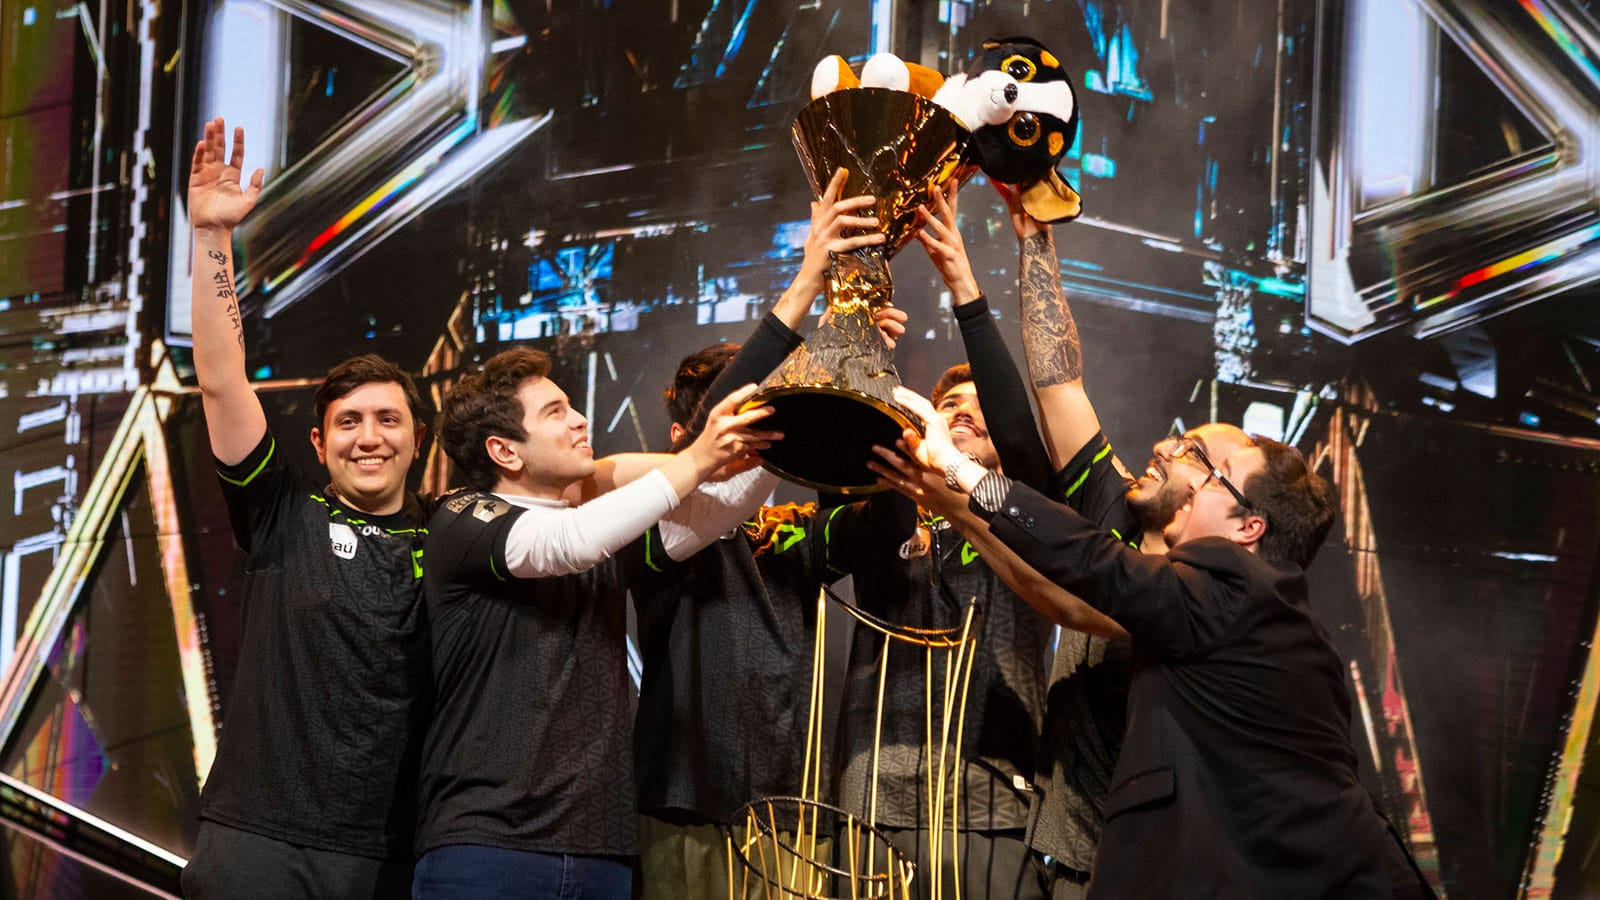 Brazil is the only country to win a world championship in Valorant, CS:GO, and R6 - ONE Esports